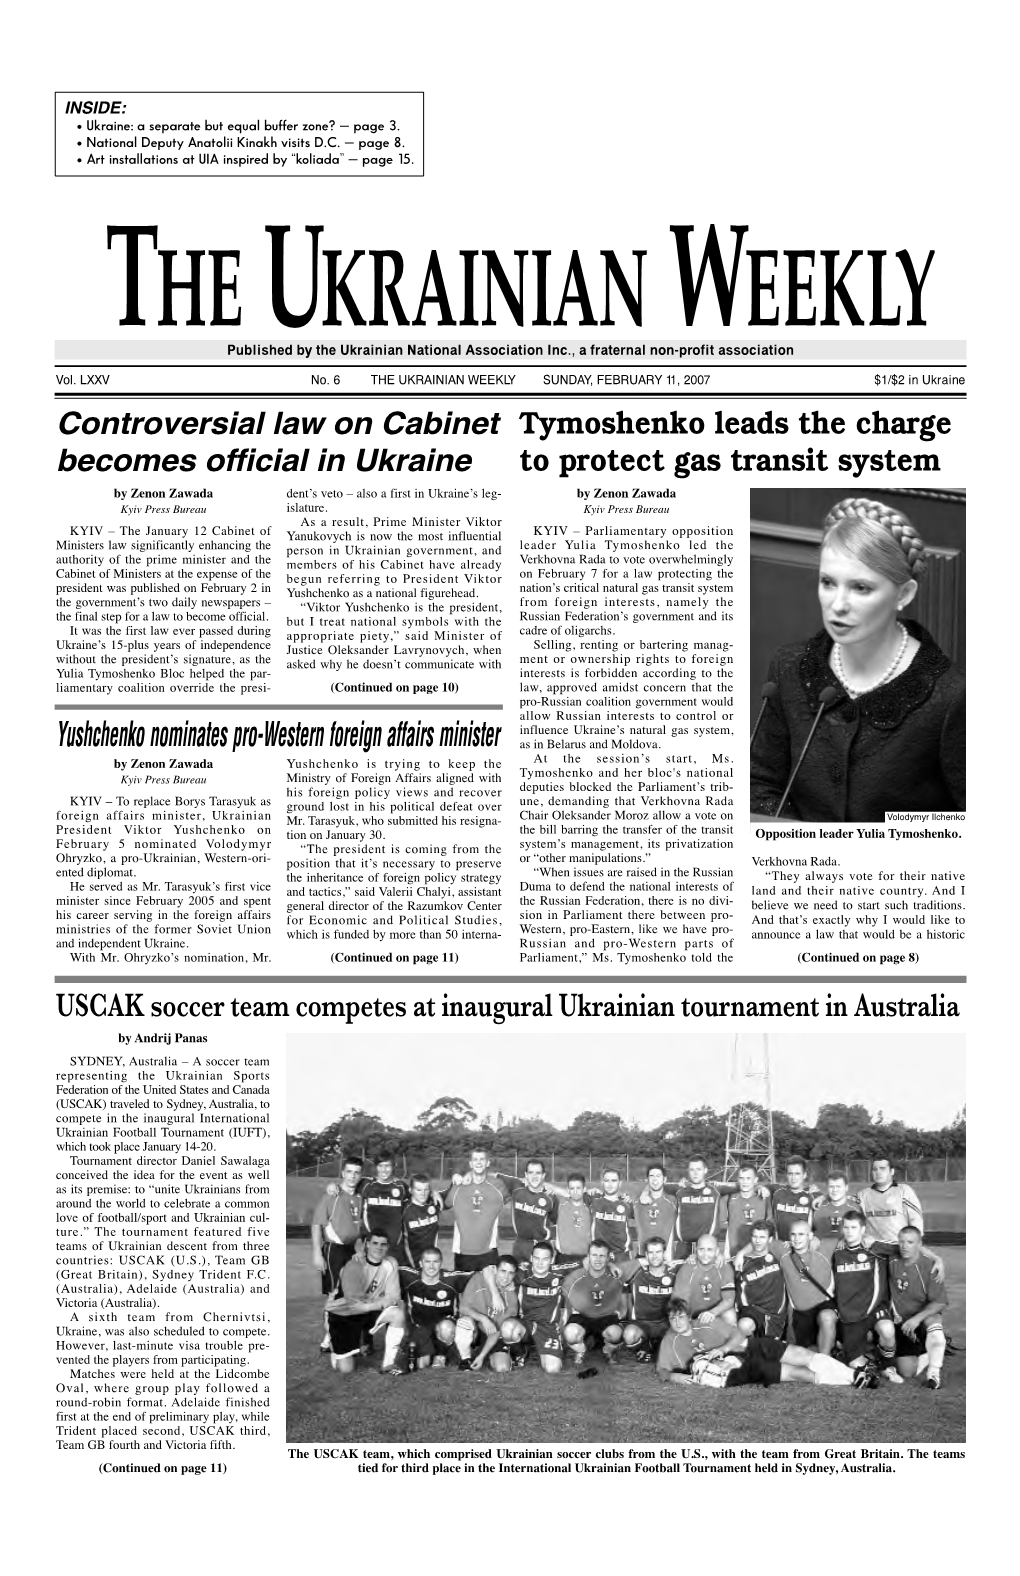 USCAK Soccer Team Competes at Inaugural Ukrainian Tournament In